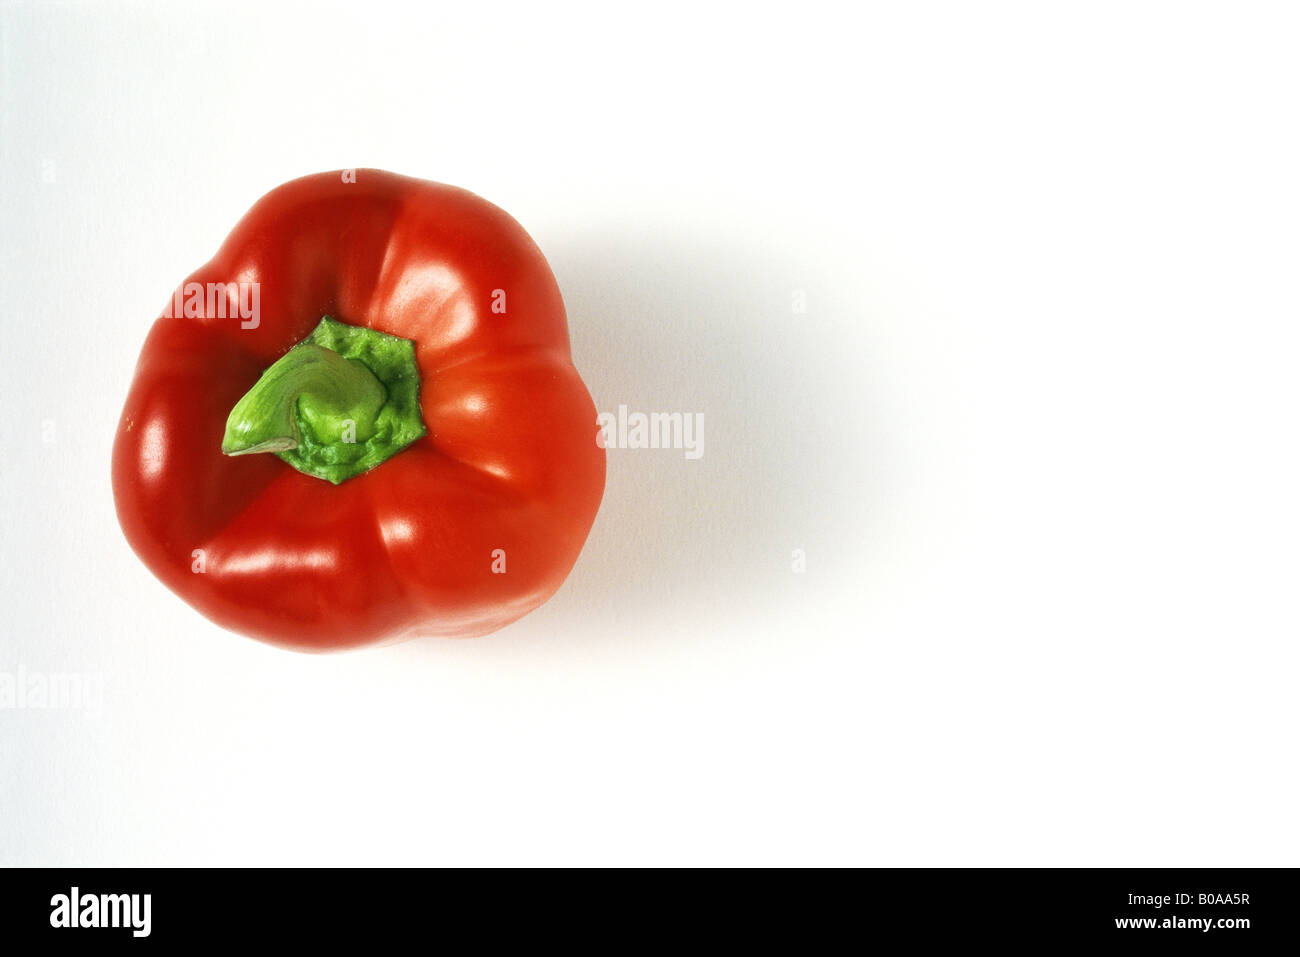 Red bell pepper, viewed from directly above Stock Photo